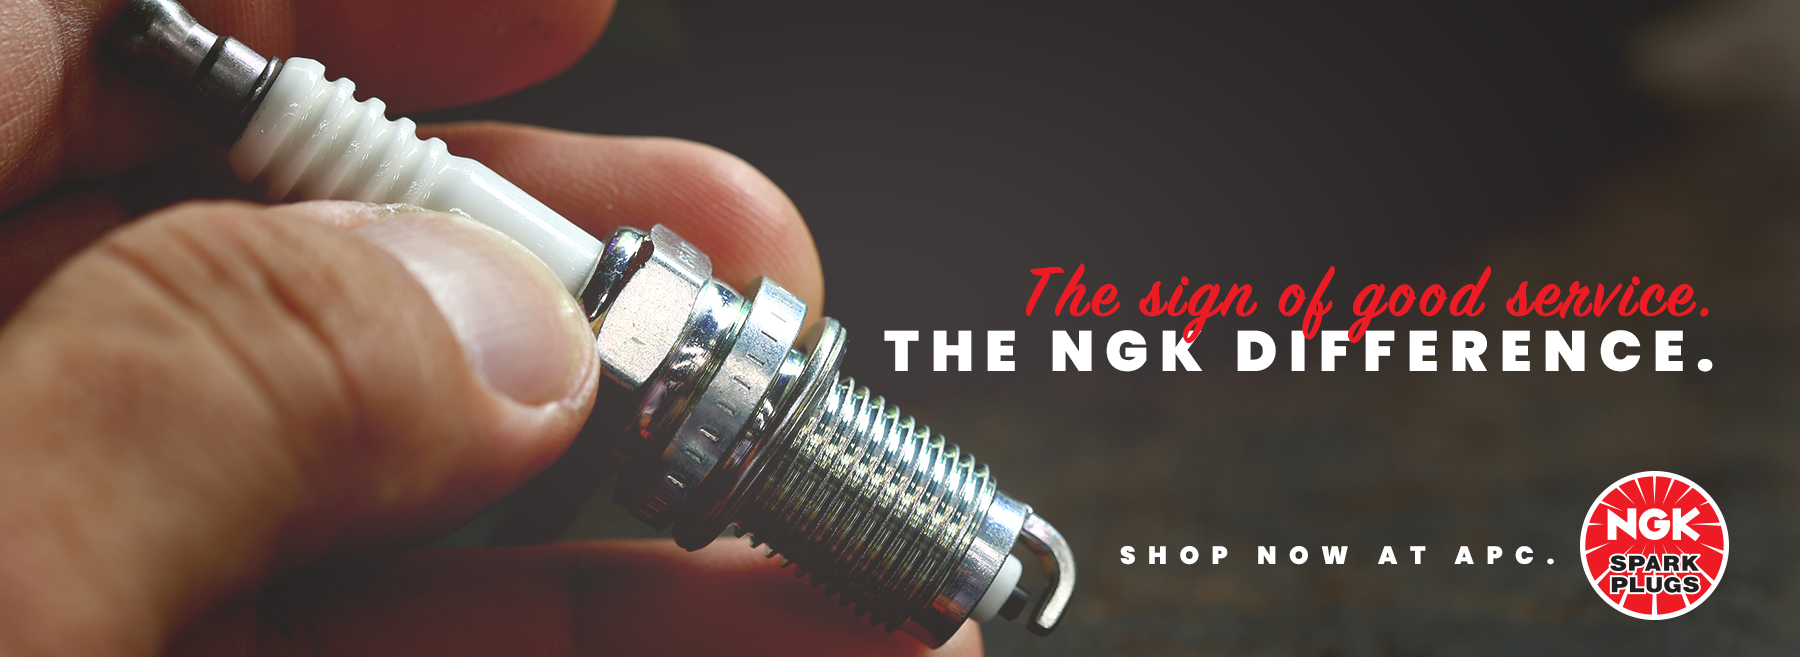 NGK Spark Plugs available